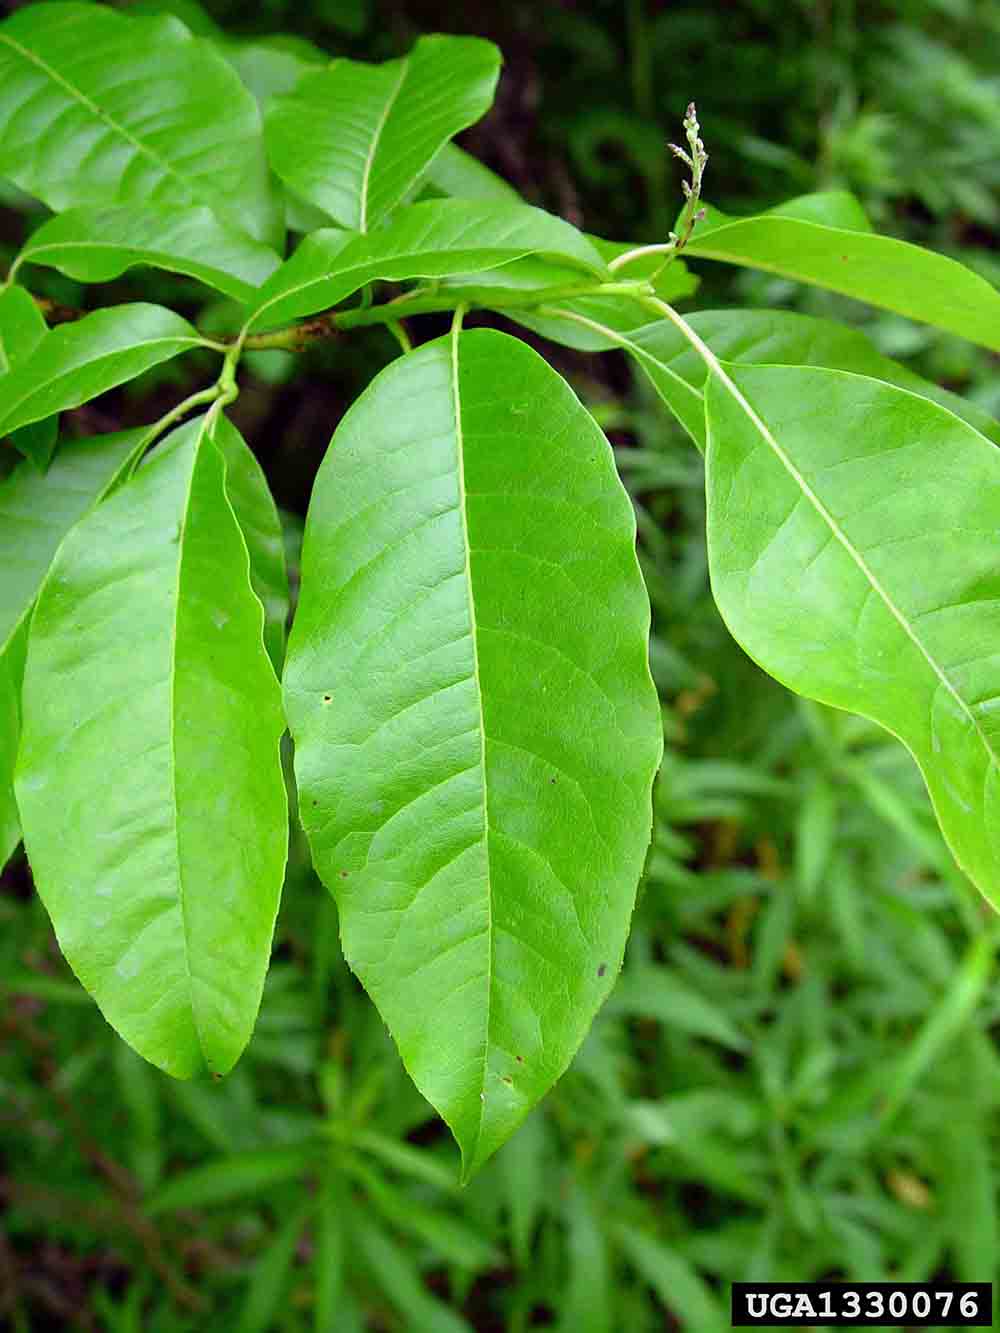 Sourwood leaves, showing finely toothed margins